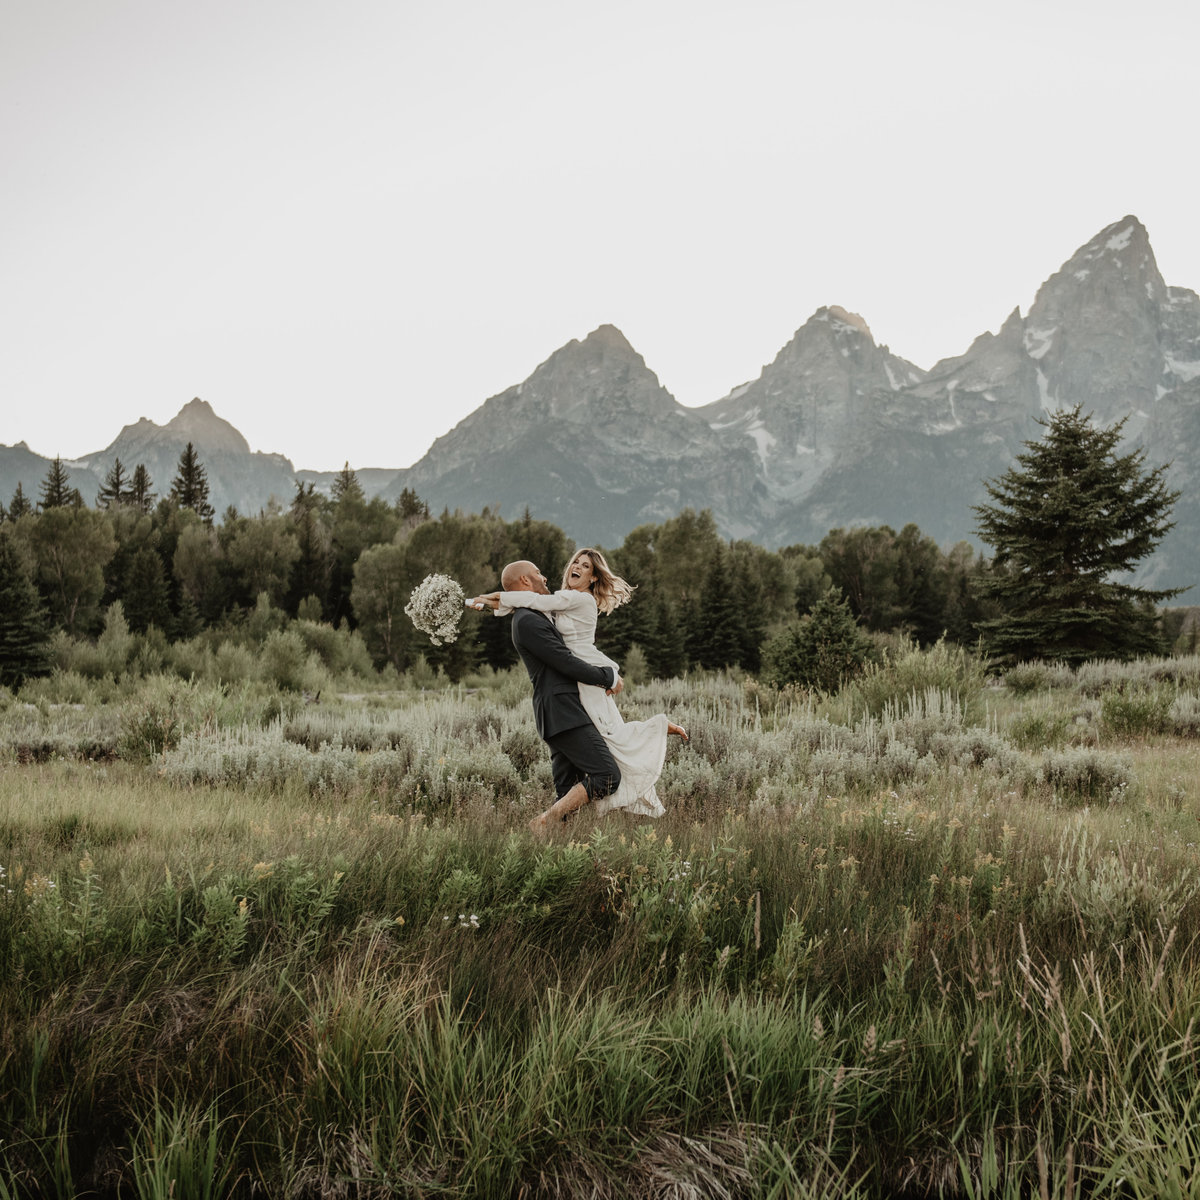 grand Teton elopement, groom picking up bride and twirling her in a field in front of the Tetons on their wedding day captured by jackson wyoming photographer